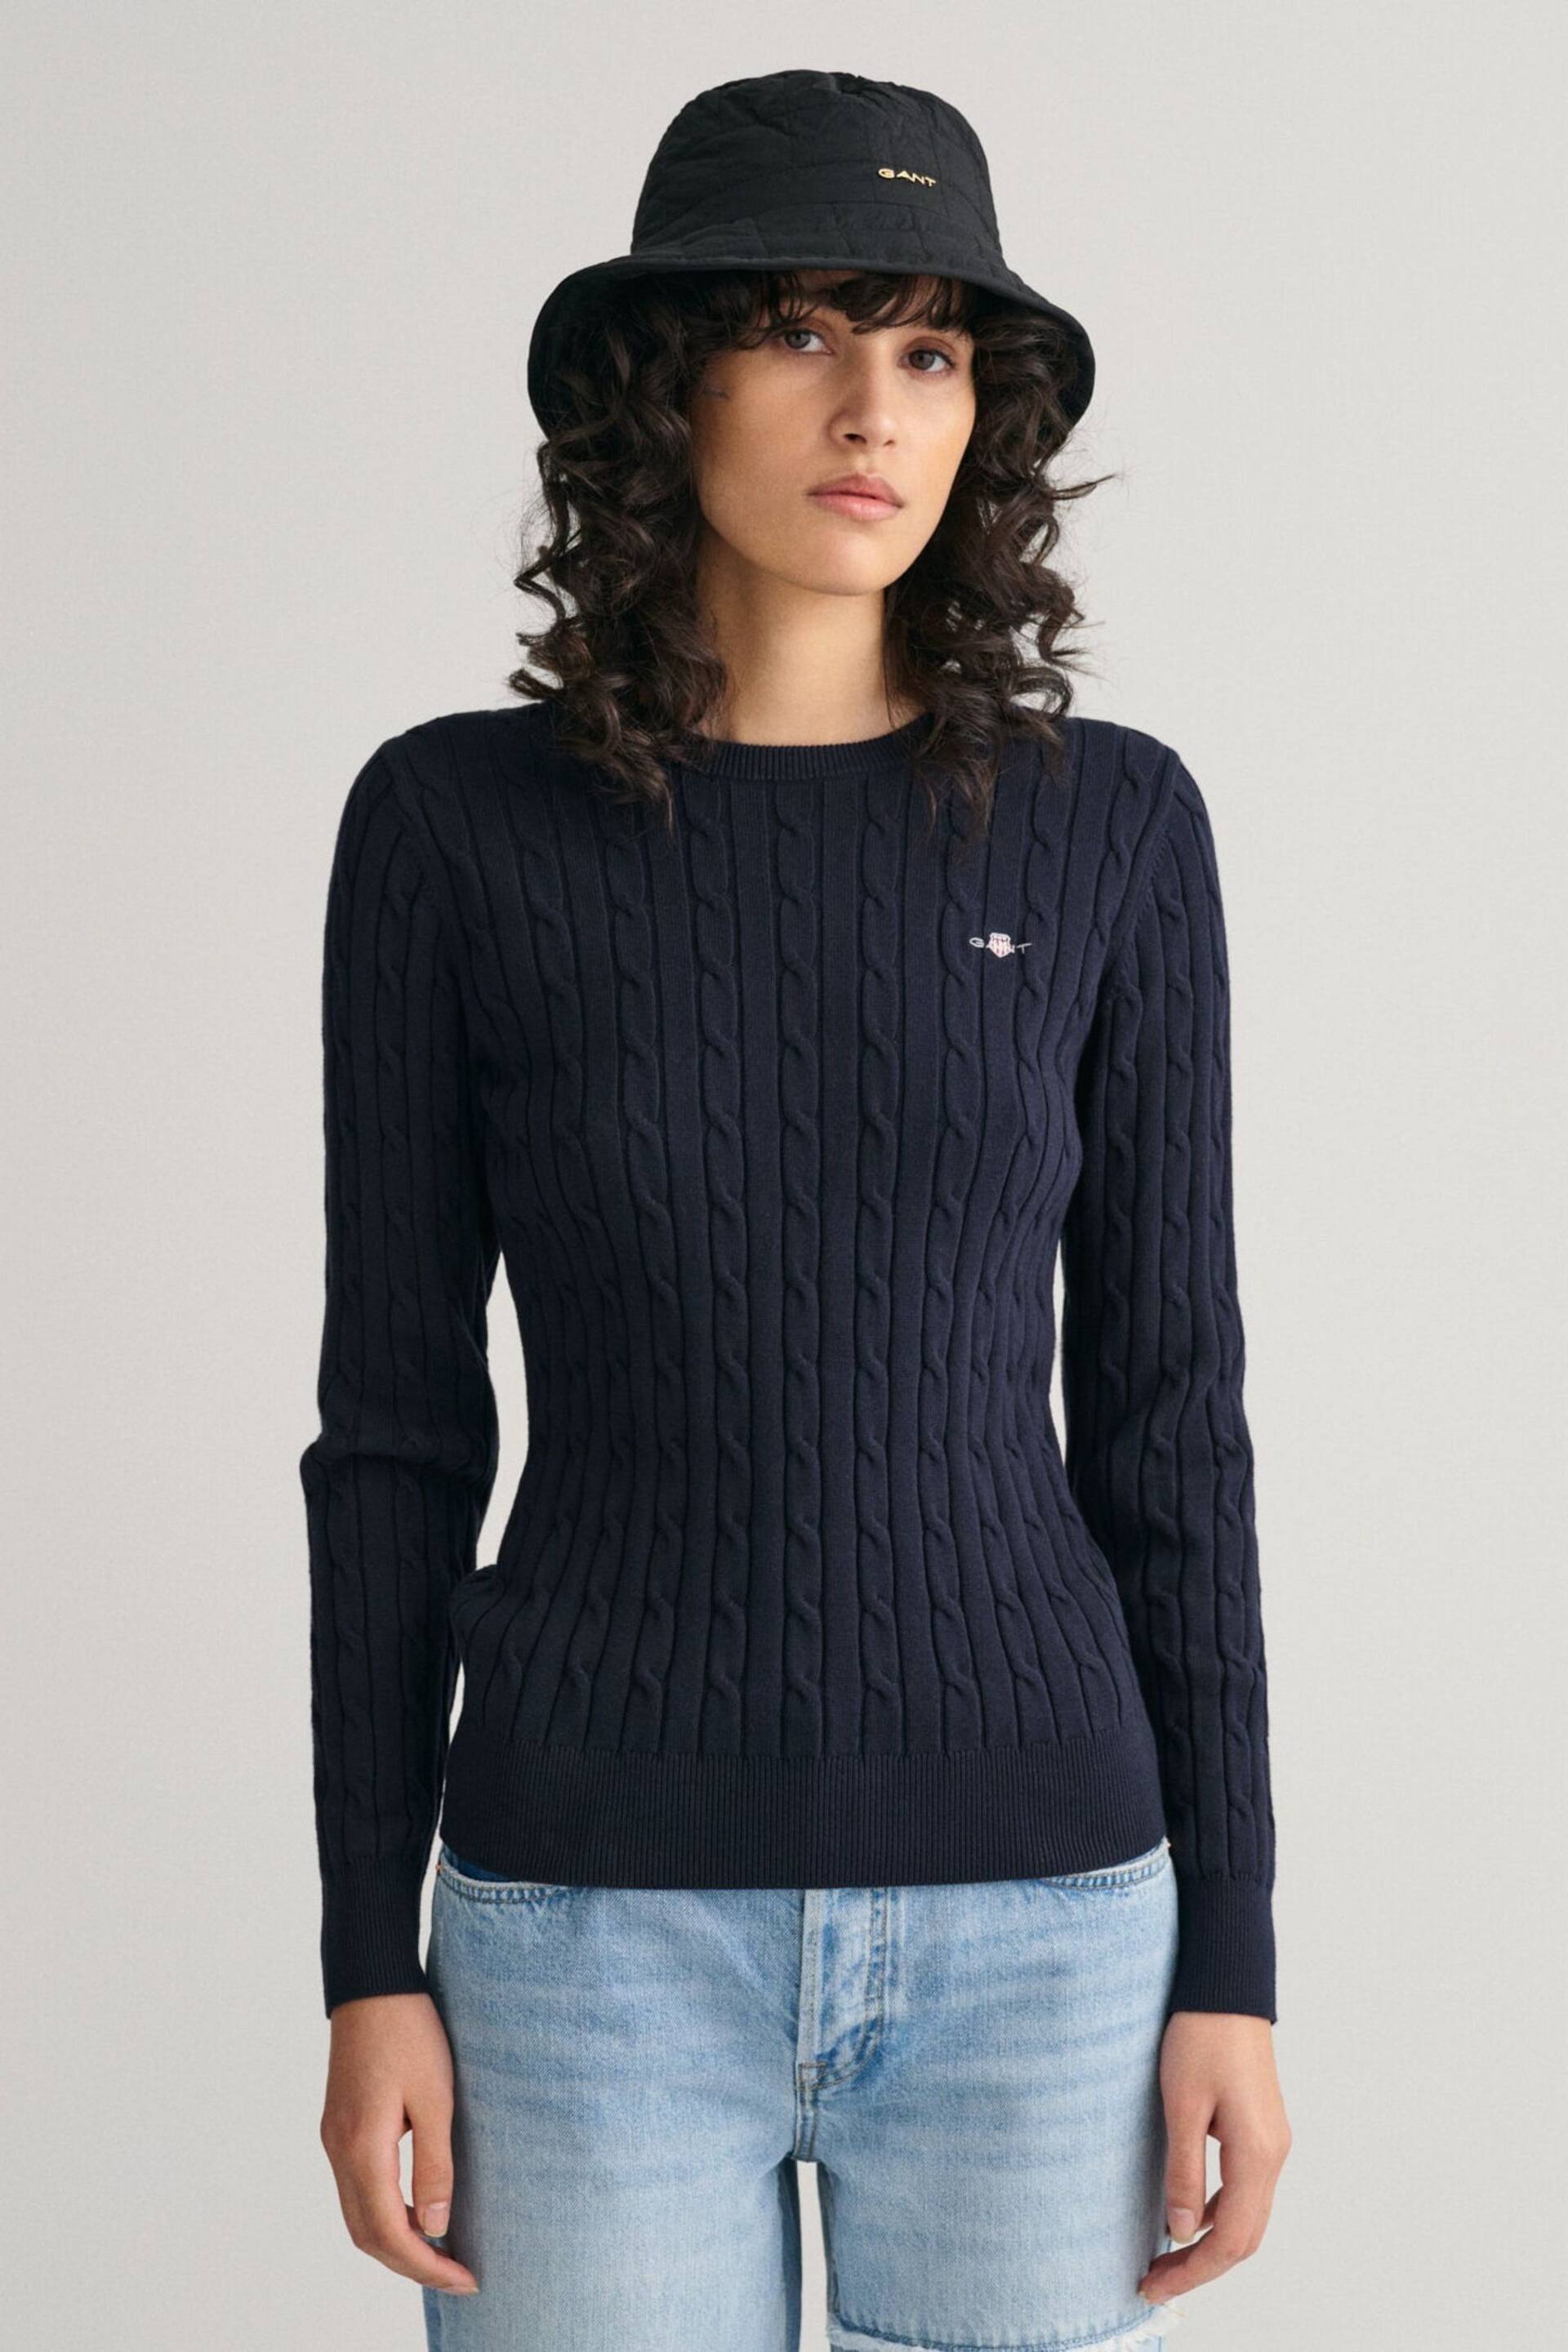 GANT Stretch Cotton Cable Knit Jumper - Image 1 of 6